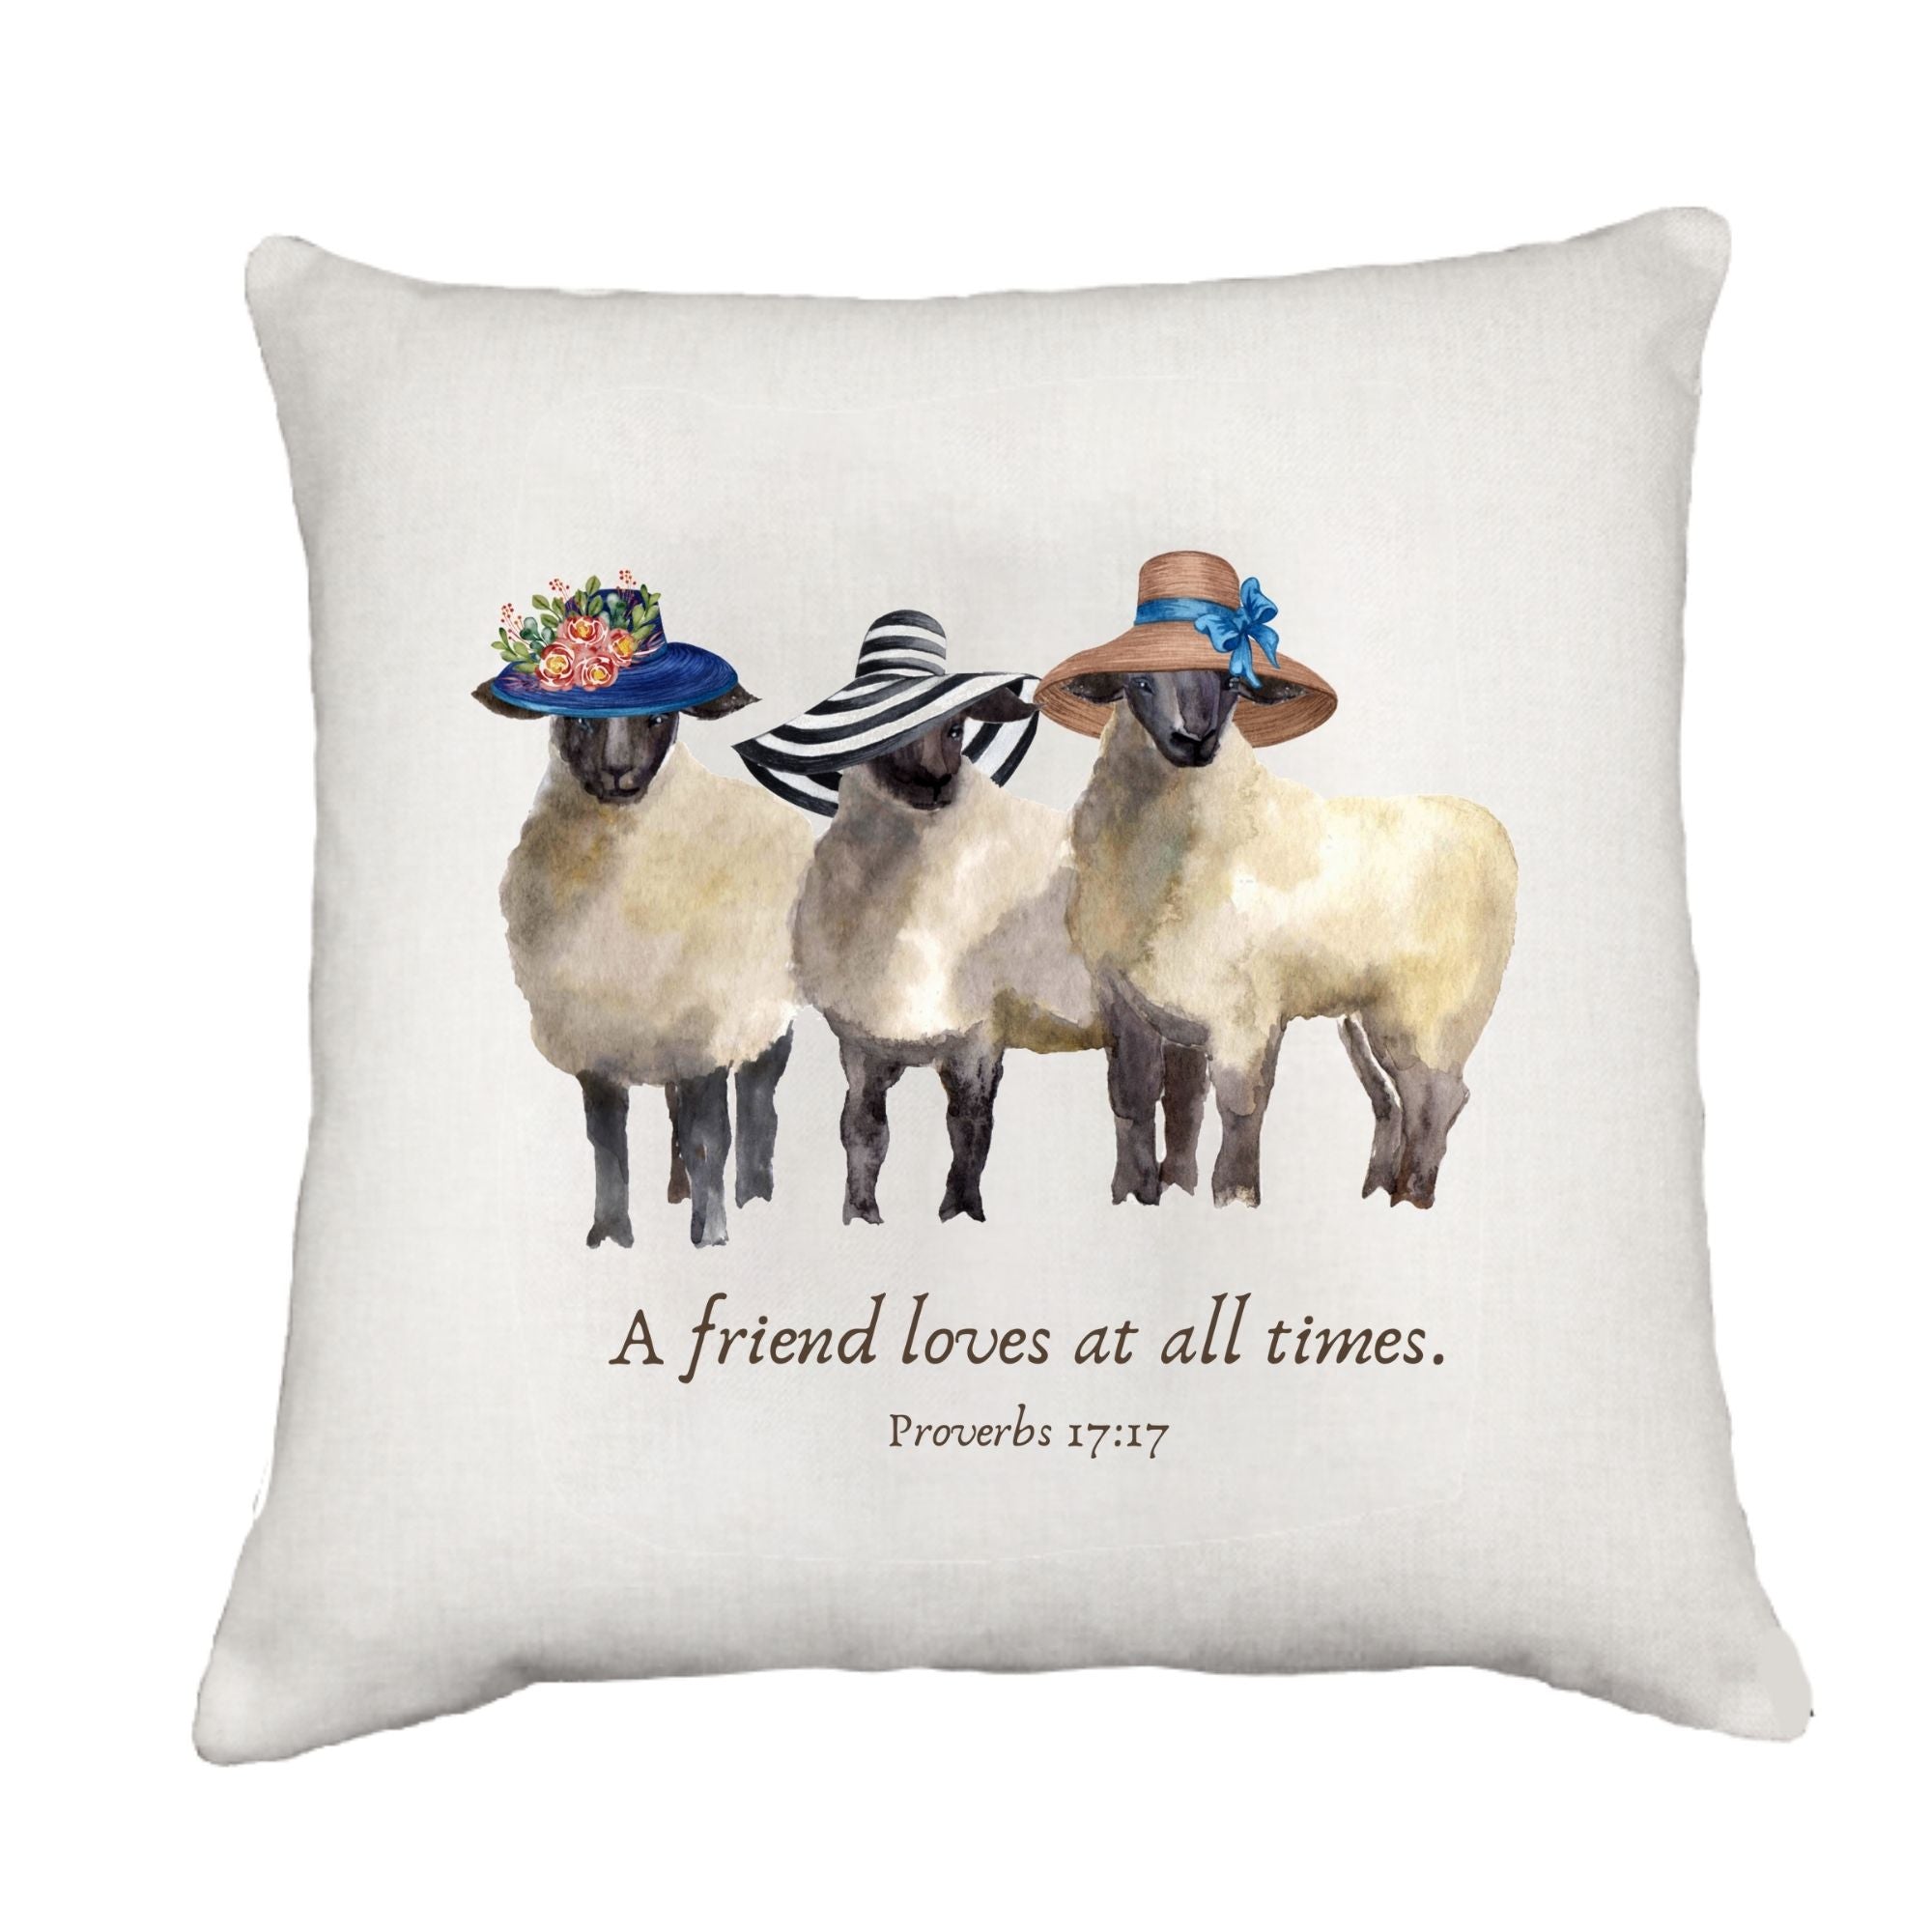 A Friend Loves Cottage Pillow Throw/Decorative Pillow - Southern Sisters